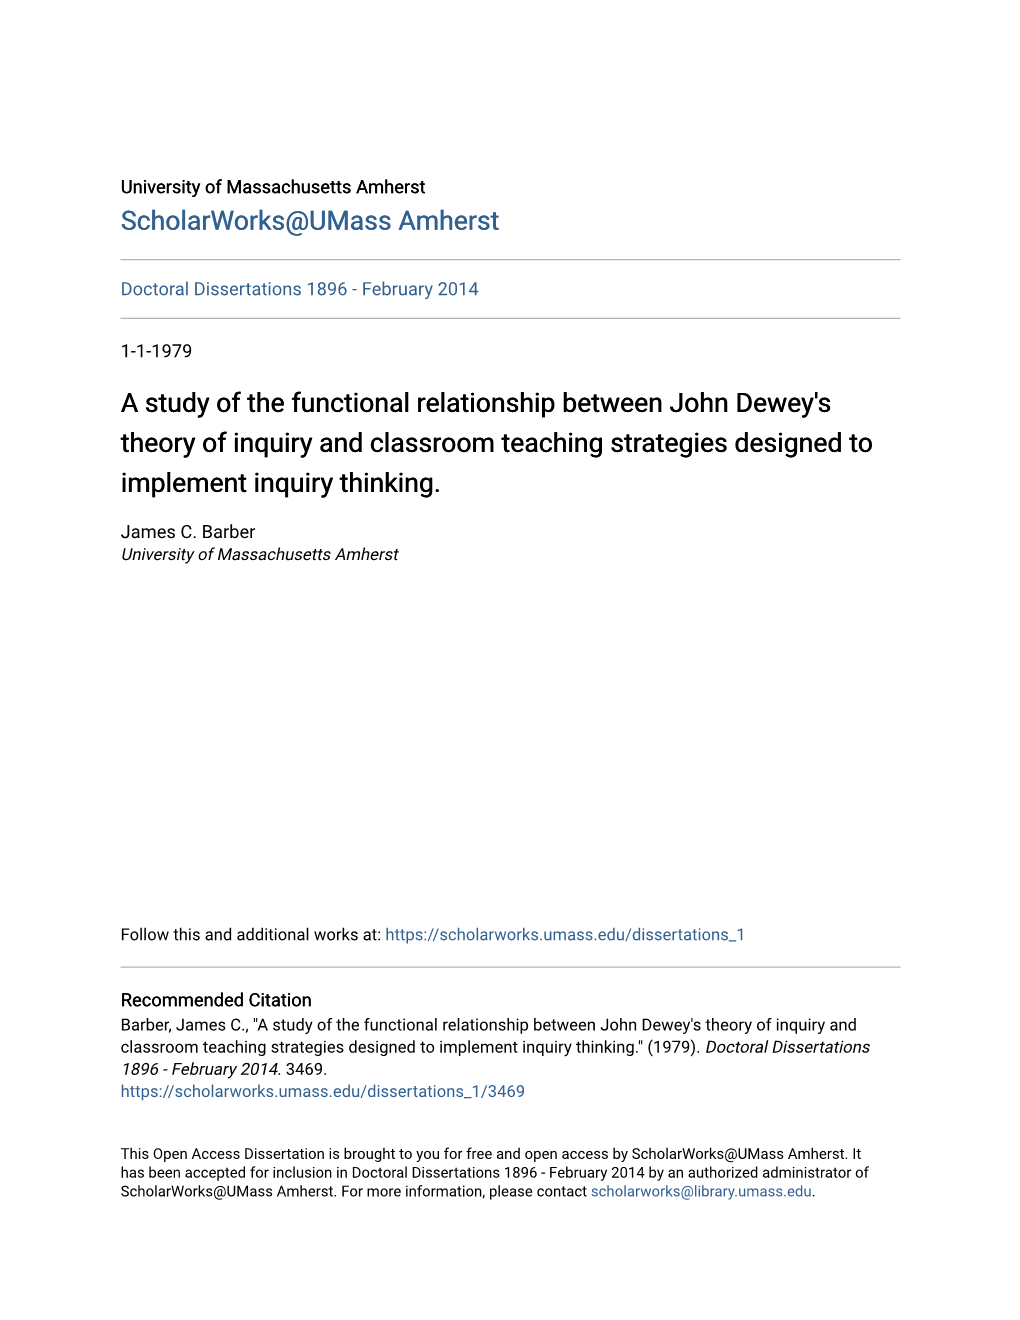 A Study of the Functional Relationship Between John Dewey's Theory of Inquiry and Classroom Teaching Strategies Designed to Implement Inquiry Thinking